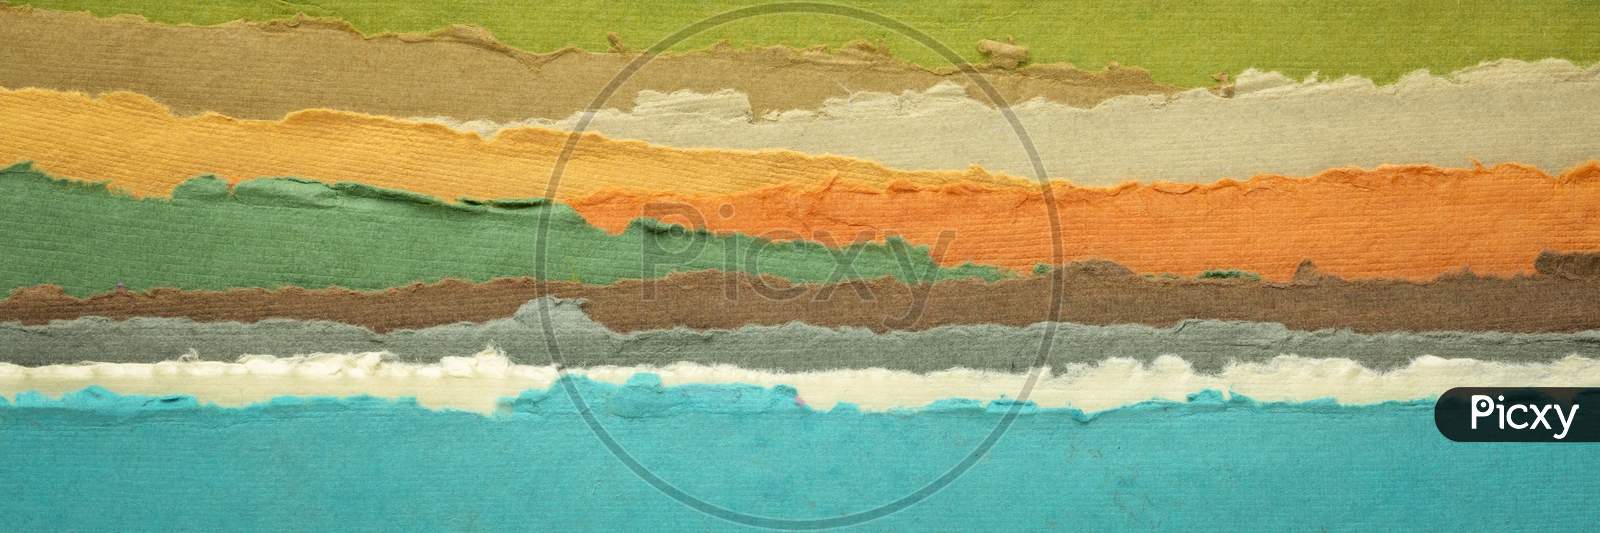 Sea And Hills Panorama - Abstract Landscape In Blue, Green And Orange Tones - A Collection Of Colorful Handmade Indian Papers Produced From Recycled Cotton Fabric